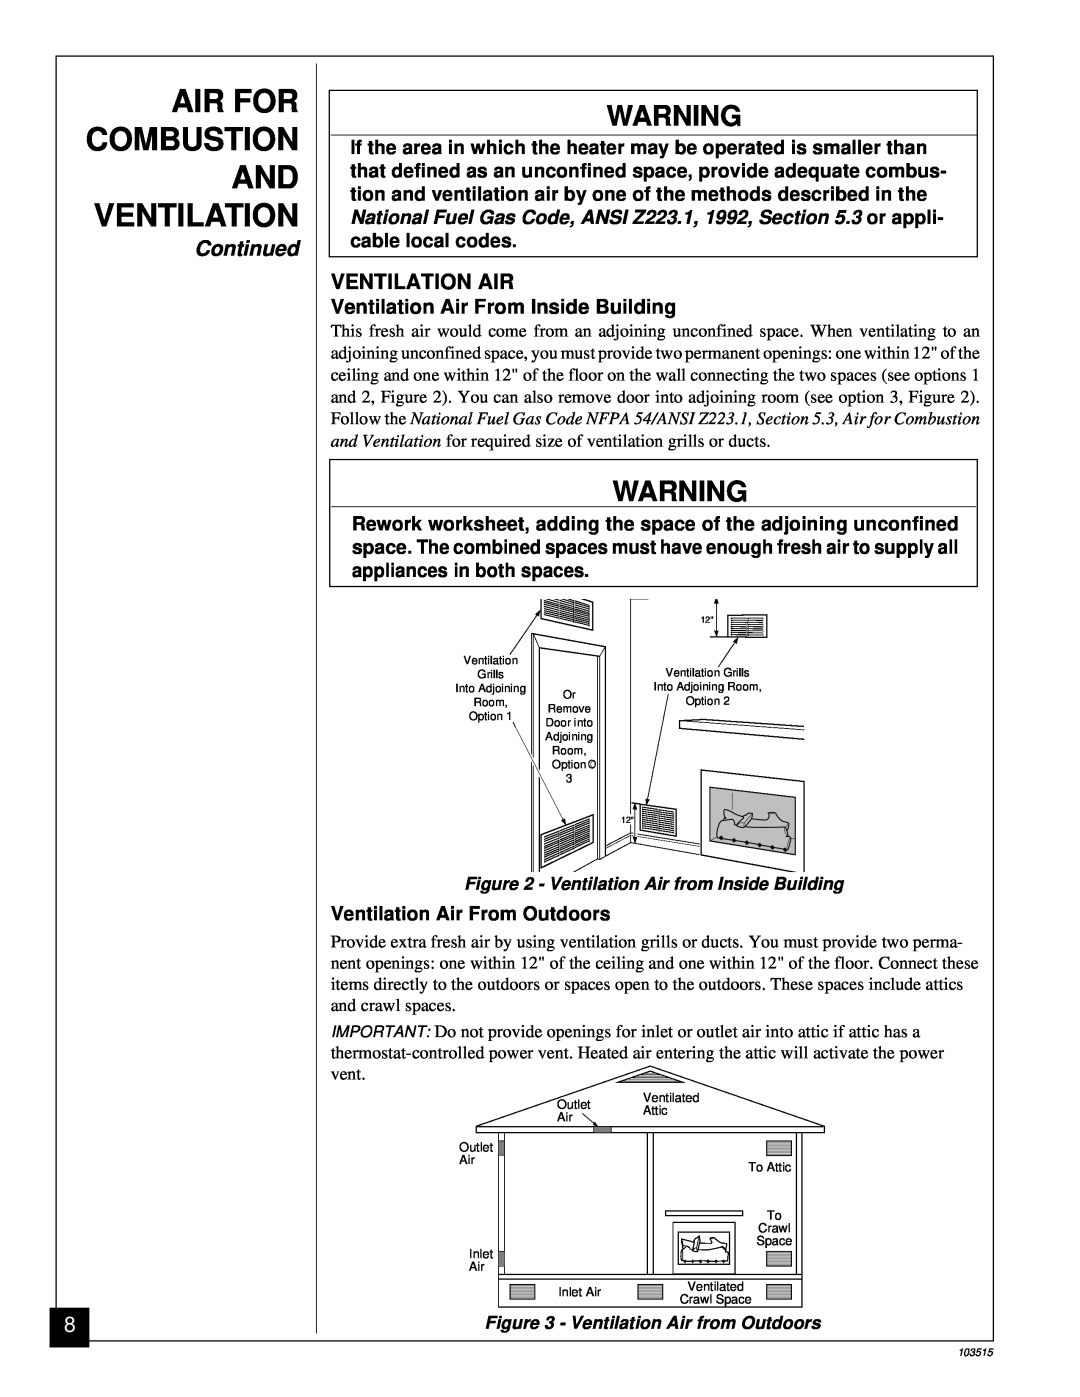 Vanguard Heating Gas Log Heater installation manual Ventilation Air, Air For Combustion And Ventilation, Continued 